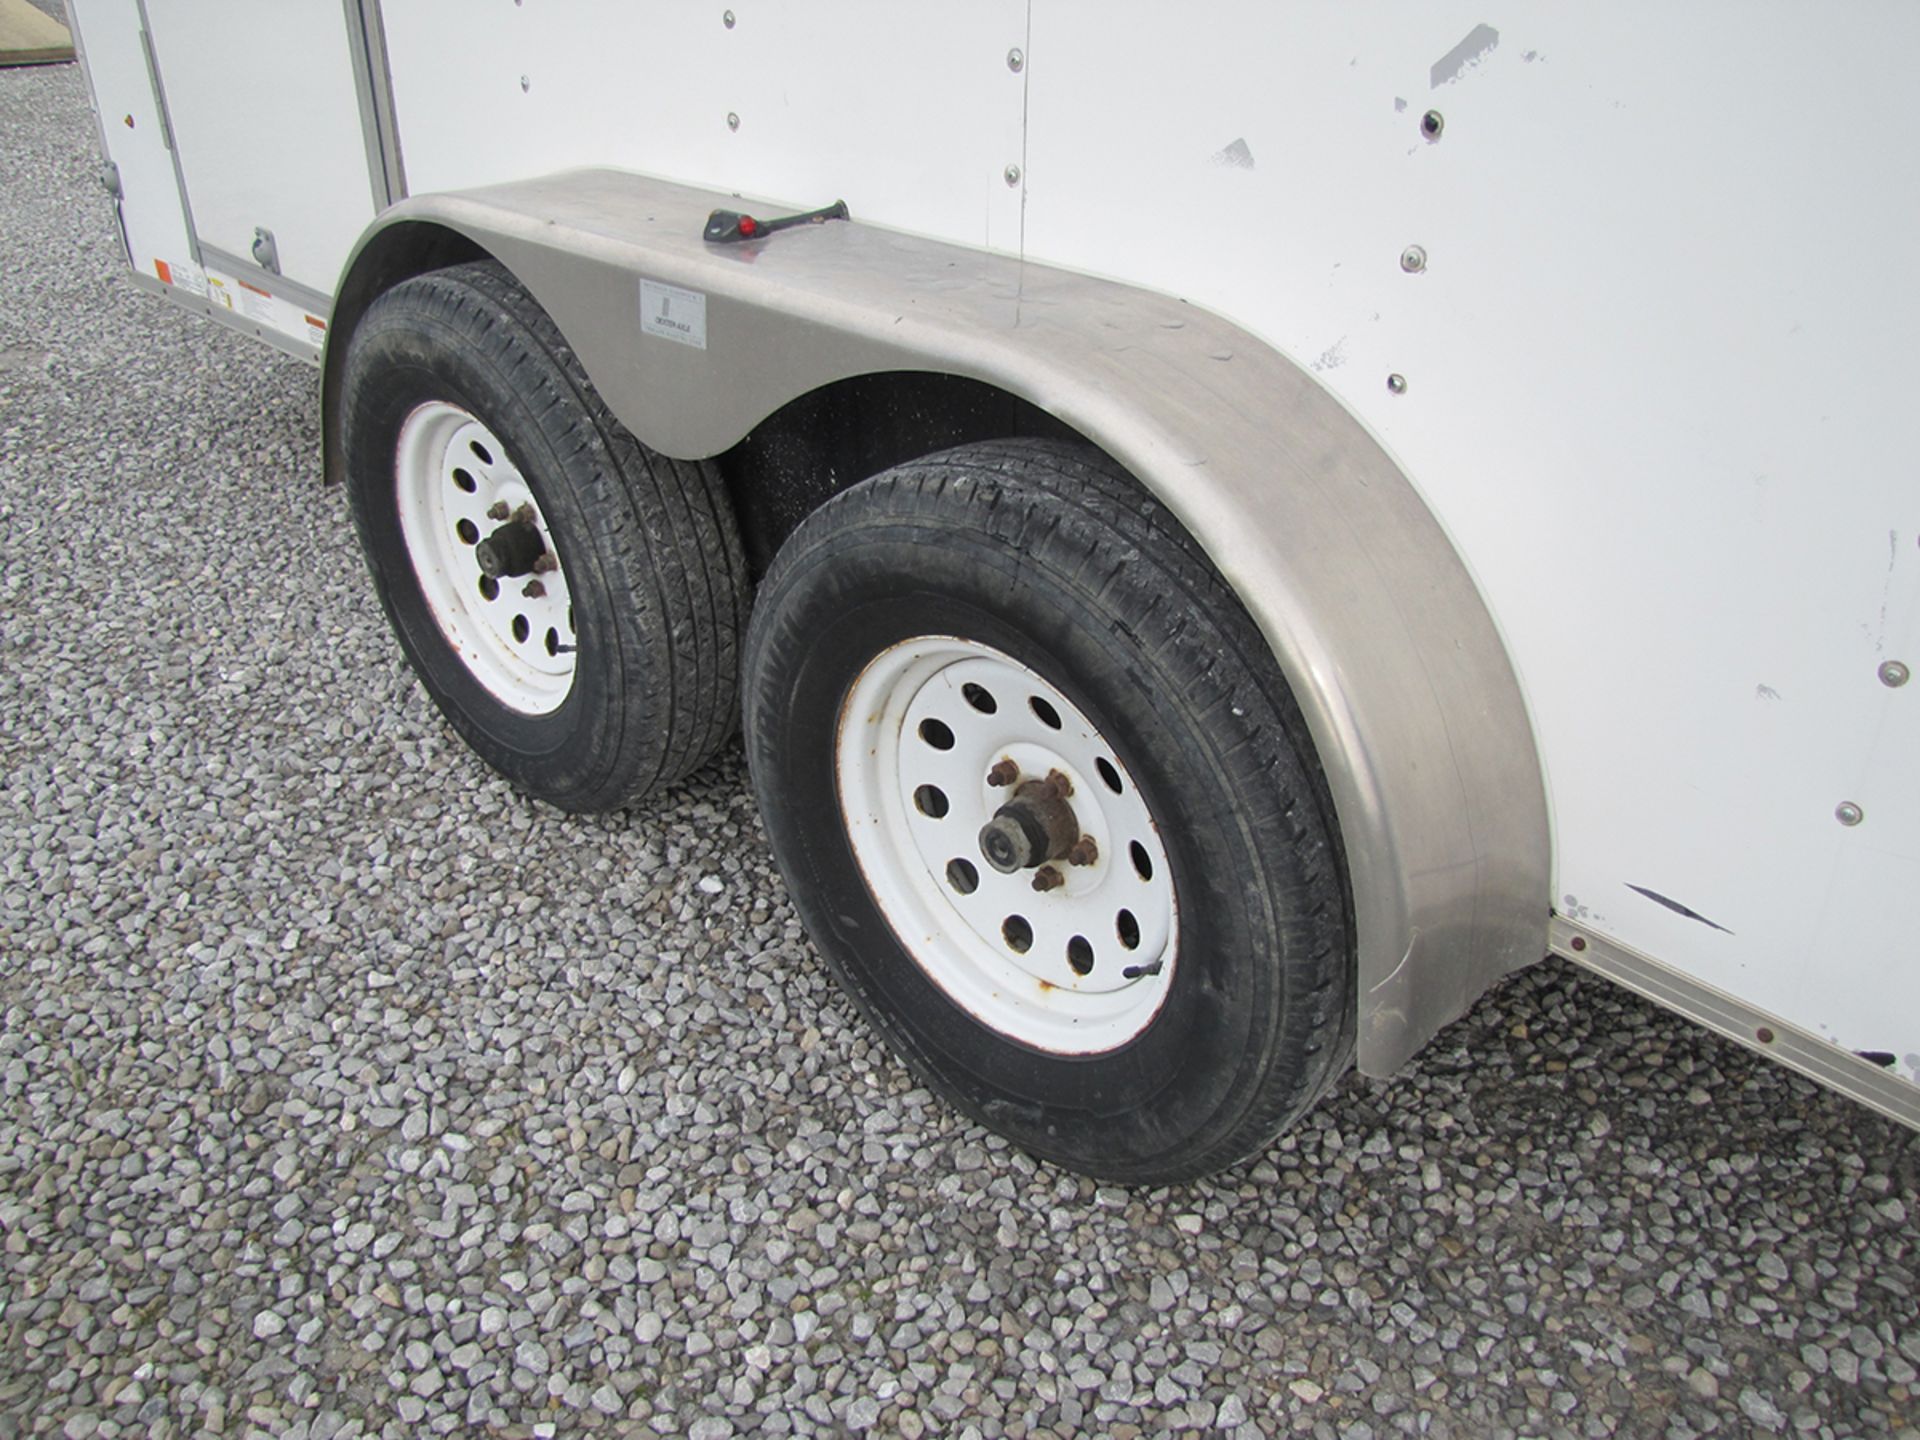 2013 12’ Look bumper-pull trailers - Image 17 of 20